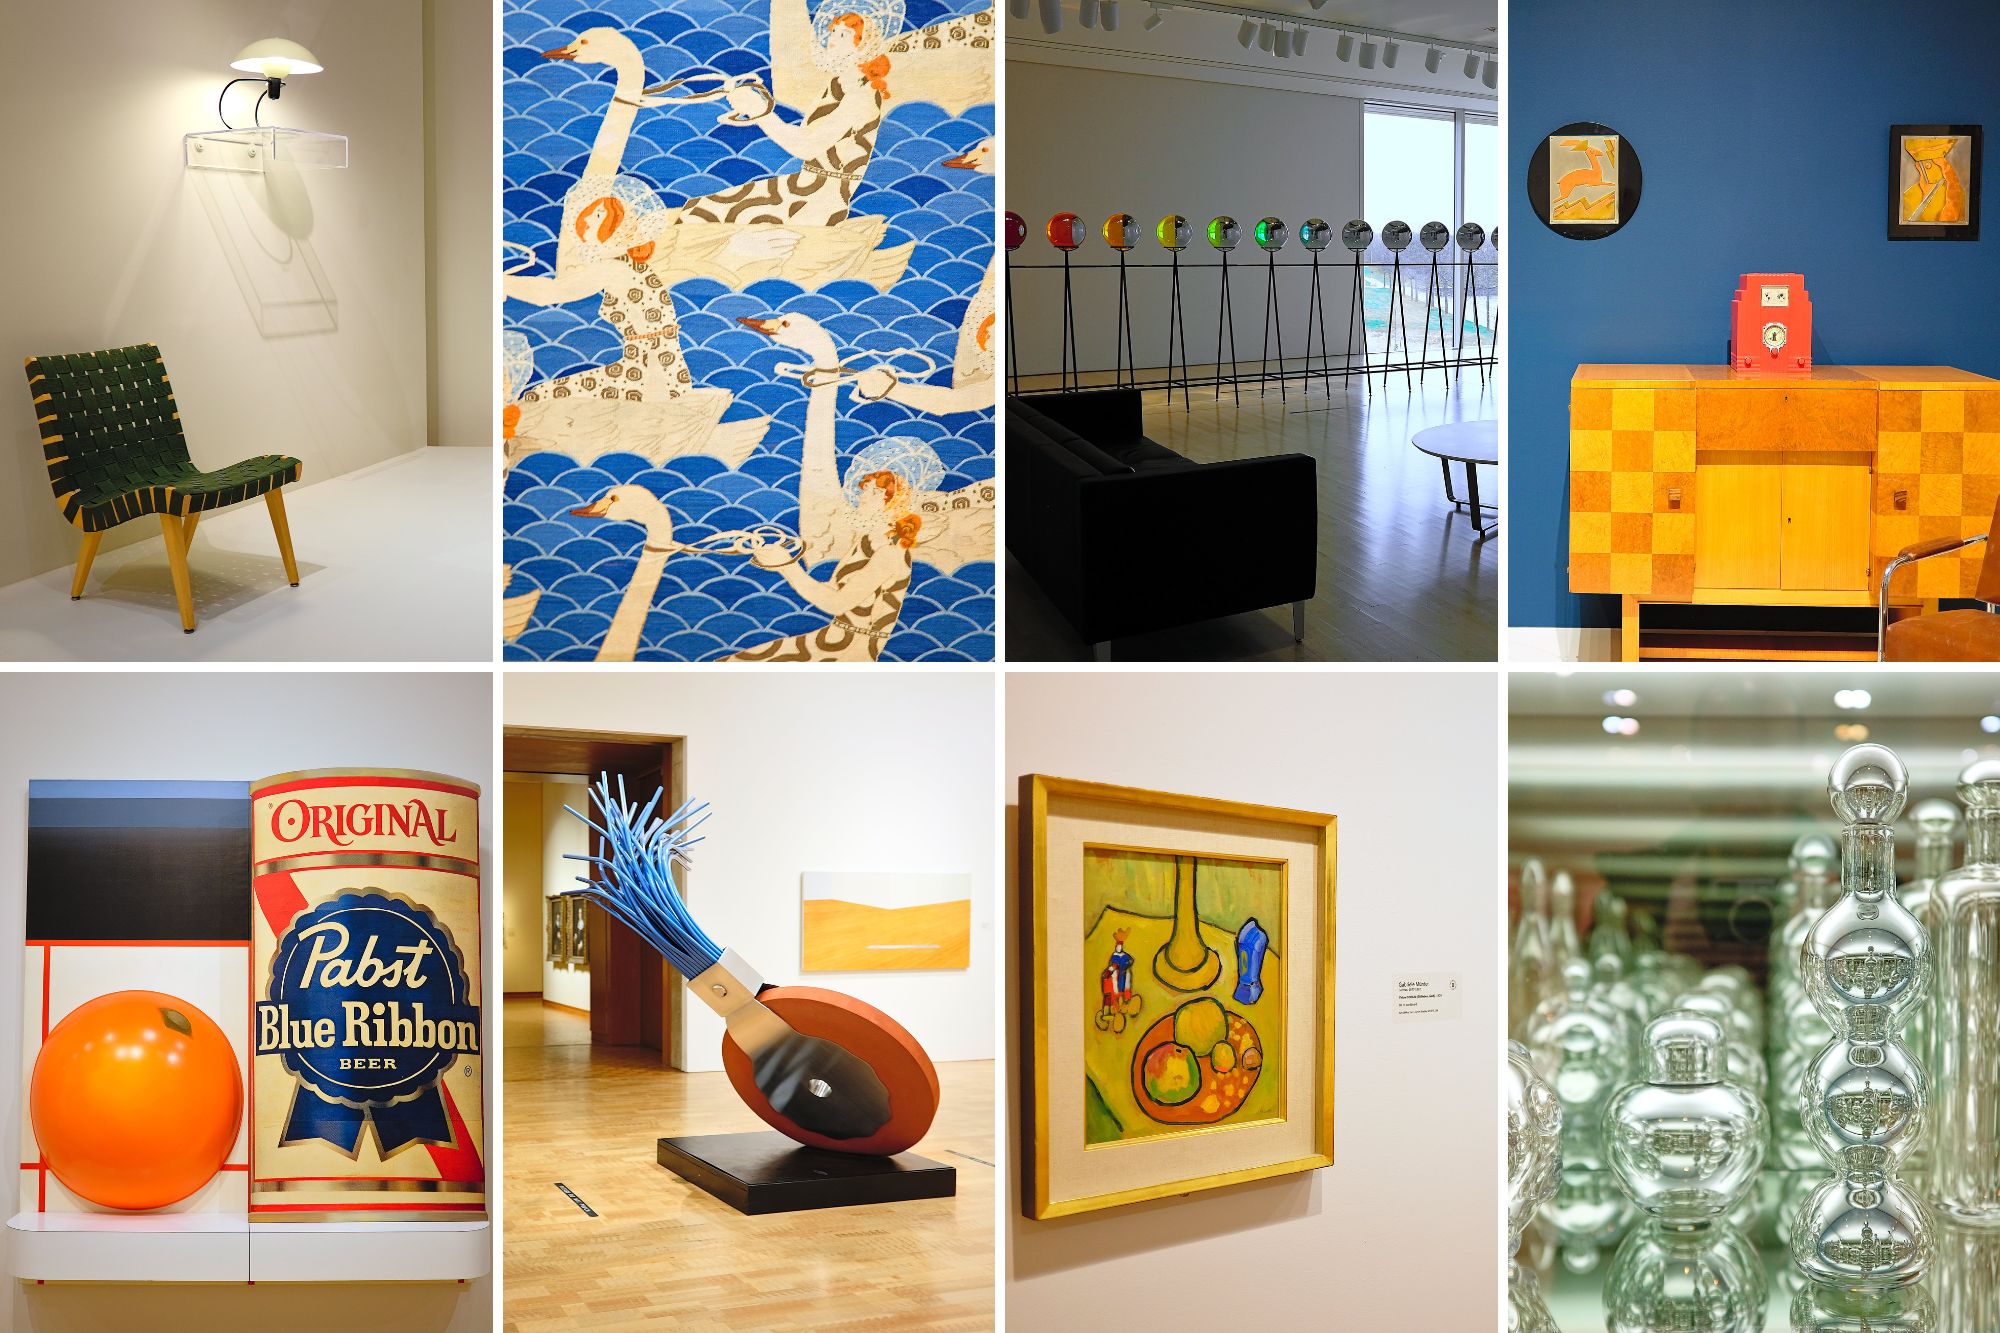 A collage of selected works of art from the museum